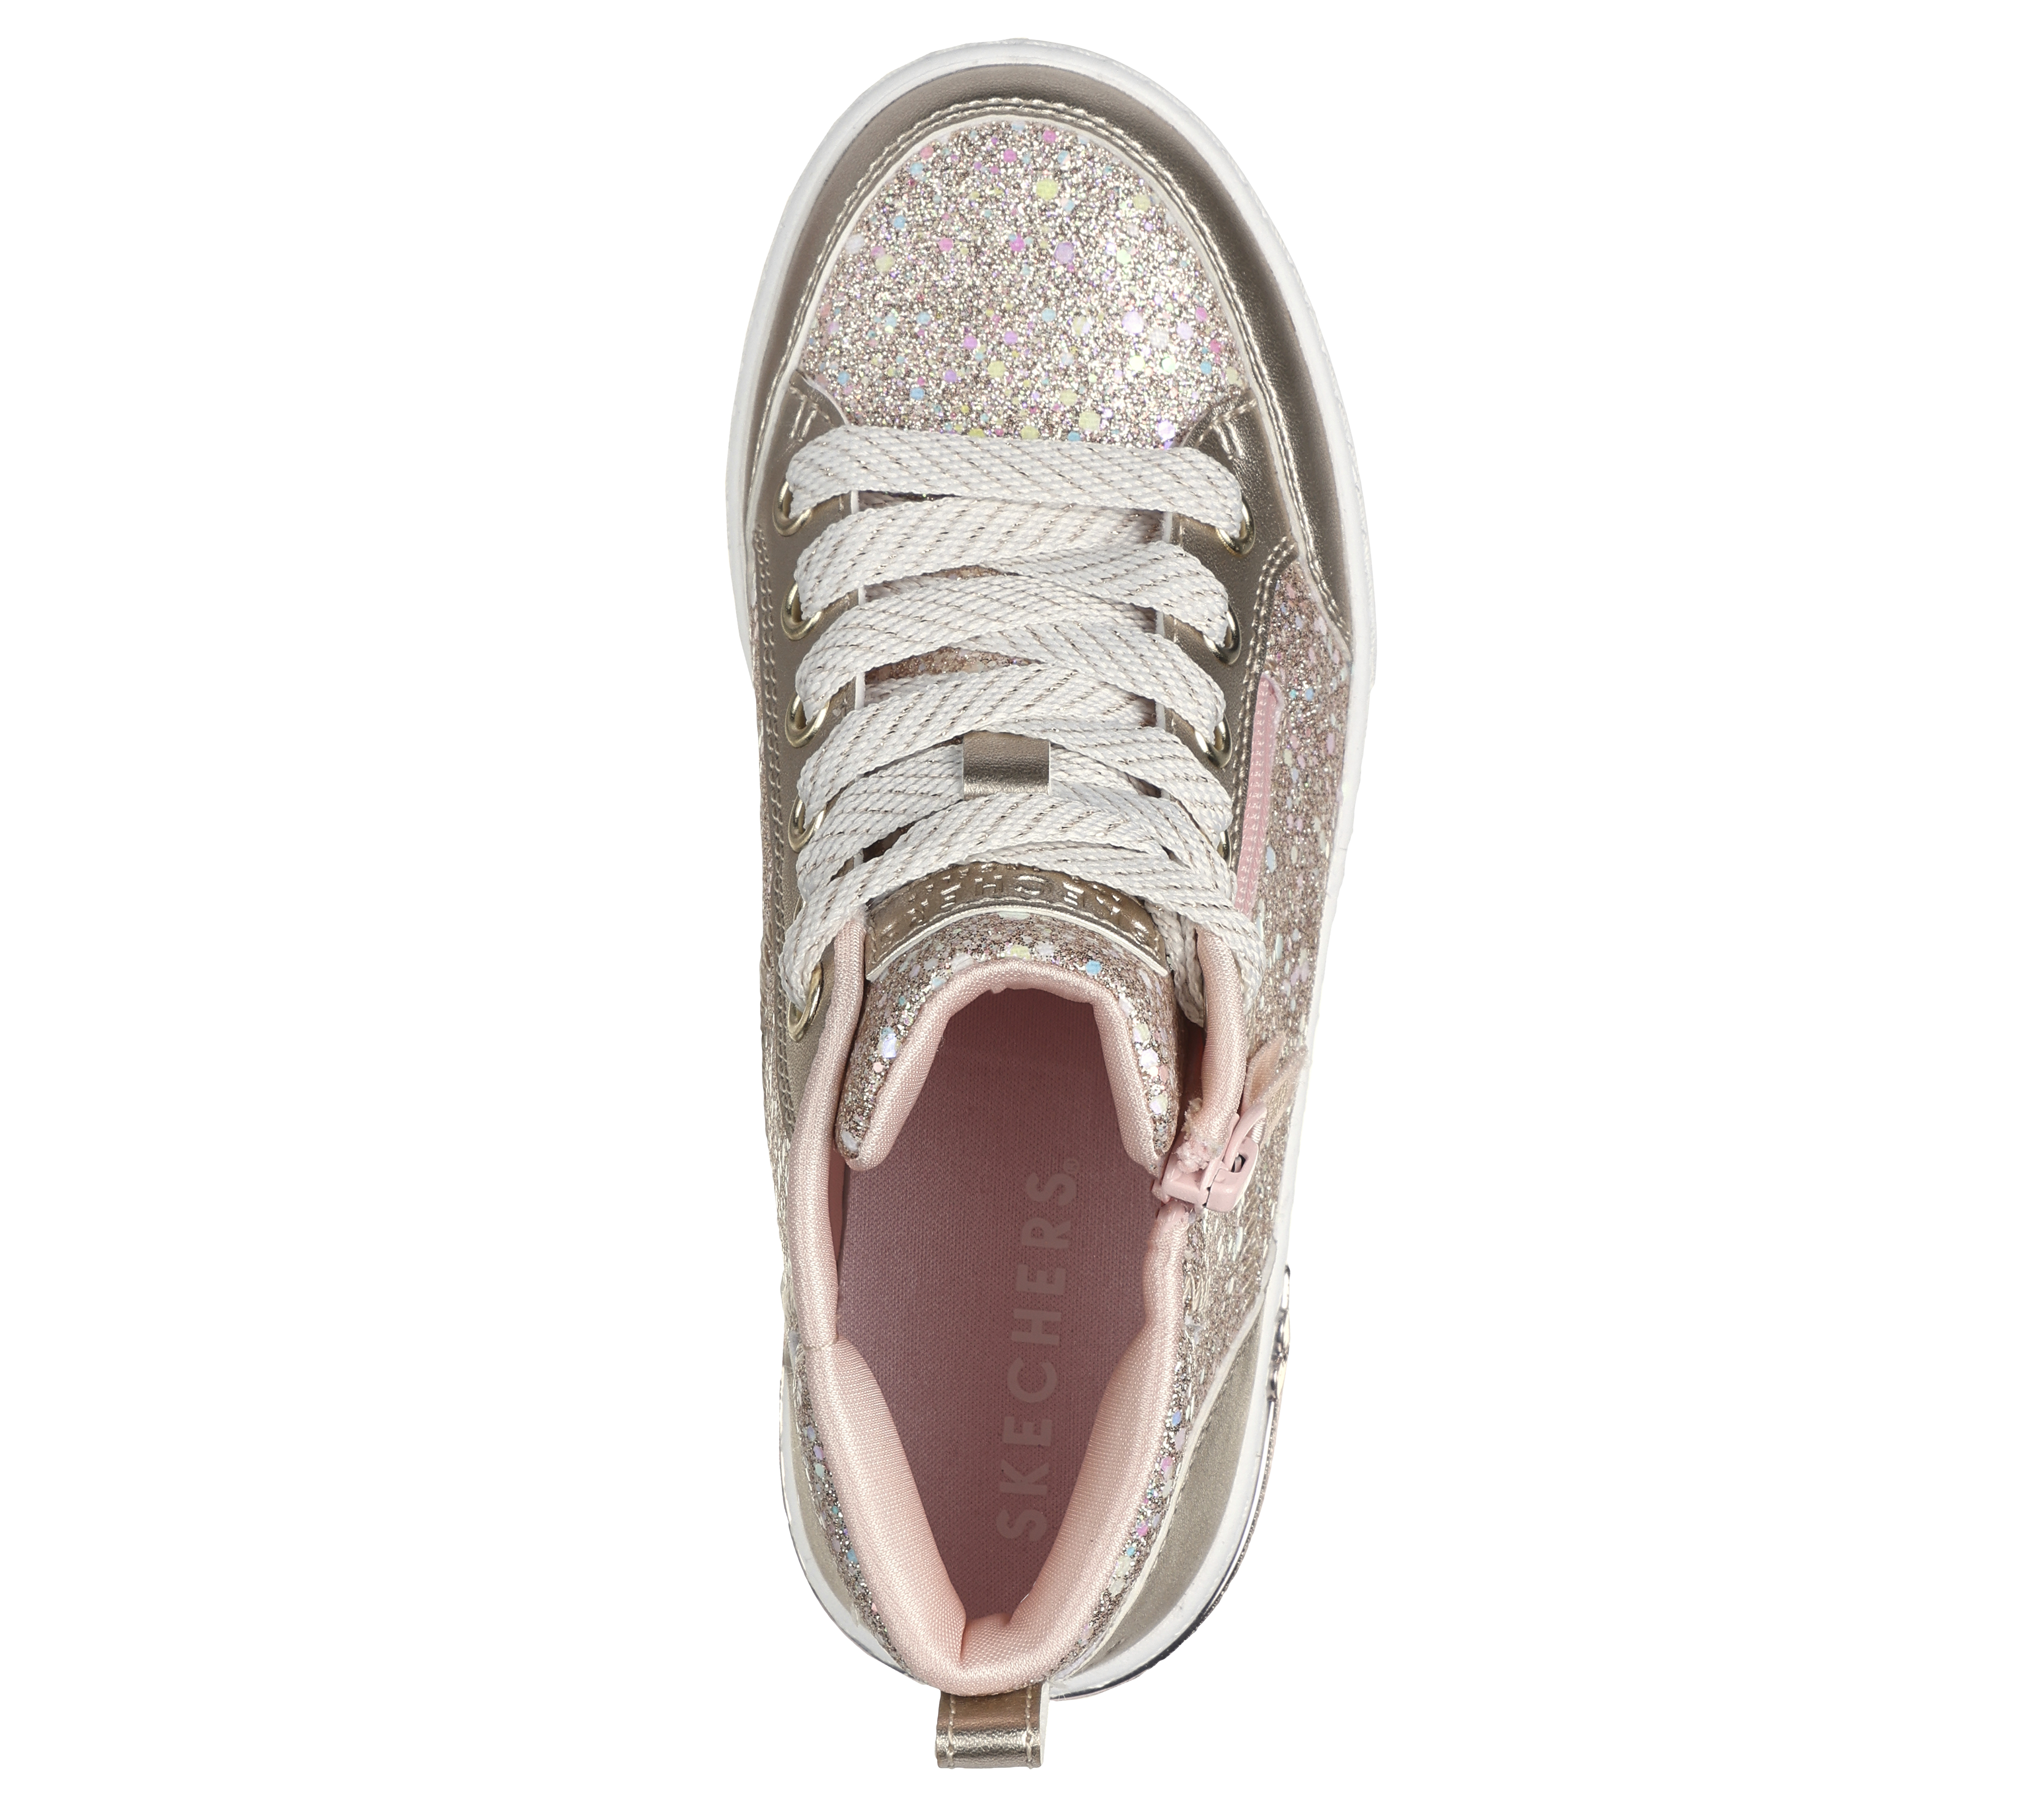 Skechers, Shoes, Sketchers Shoutouts Sneakers Rose Gold Glitter Youth  Size 4 2